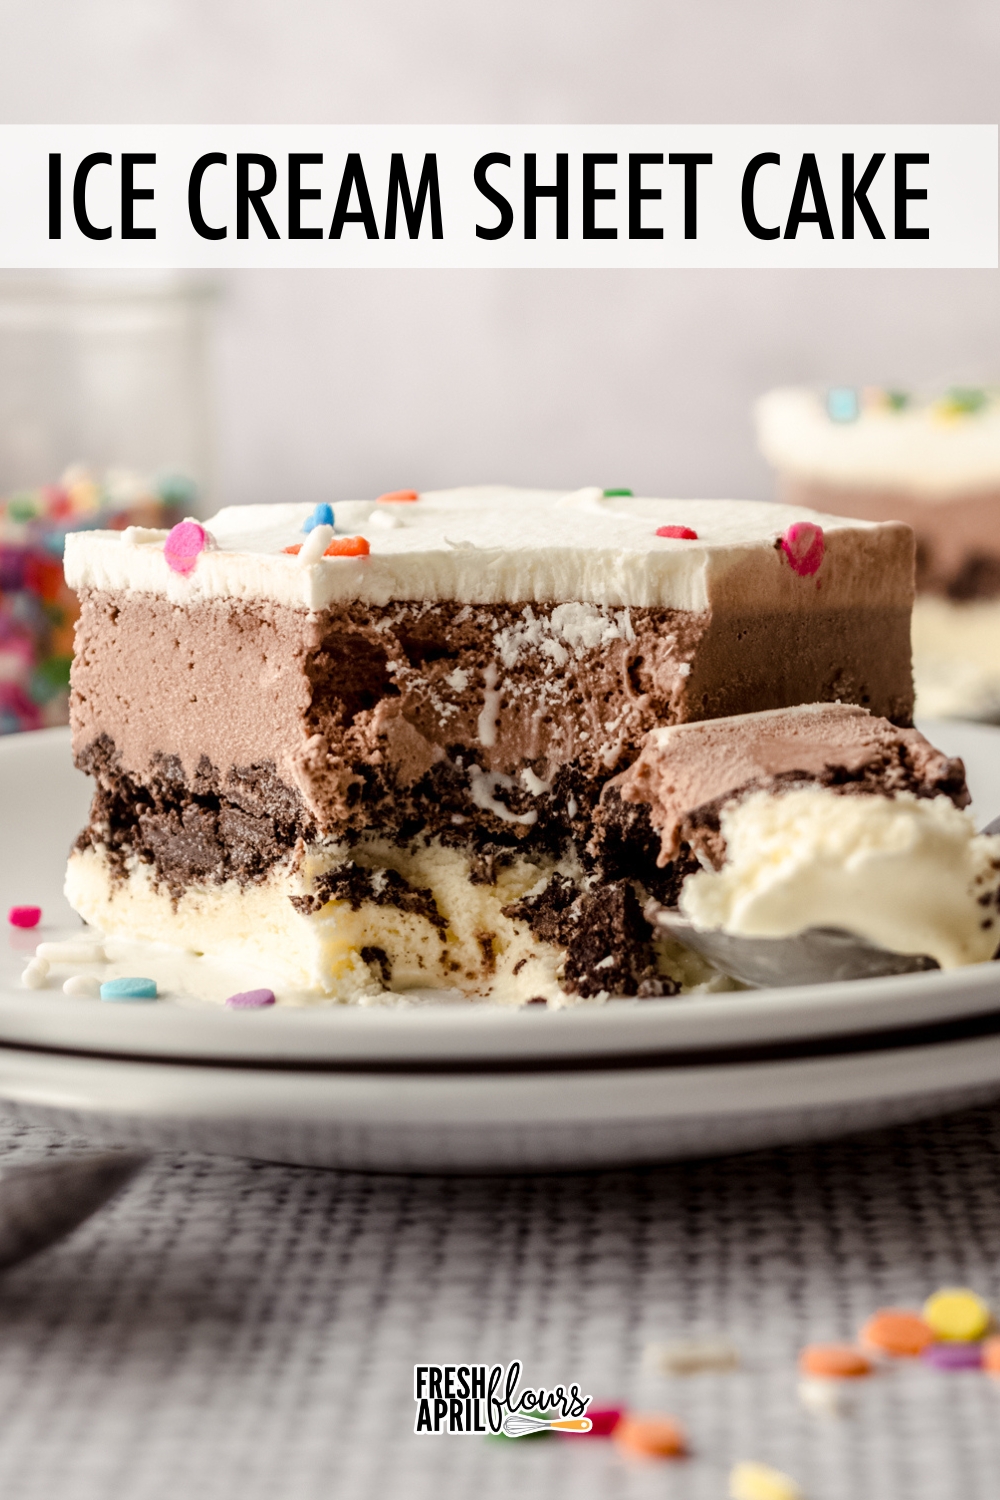 This easy recipe for homemade ice cream cake features two ice cream flavors of your choice, a crunchy cookie layer right in the middle, and homemade whipped cream and sprinkles on top. This no bake dessert makes a great make-ahead option since it needs to to freeze for at least 12 hours before serving.  via @frshaprilflours